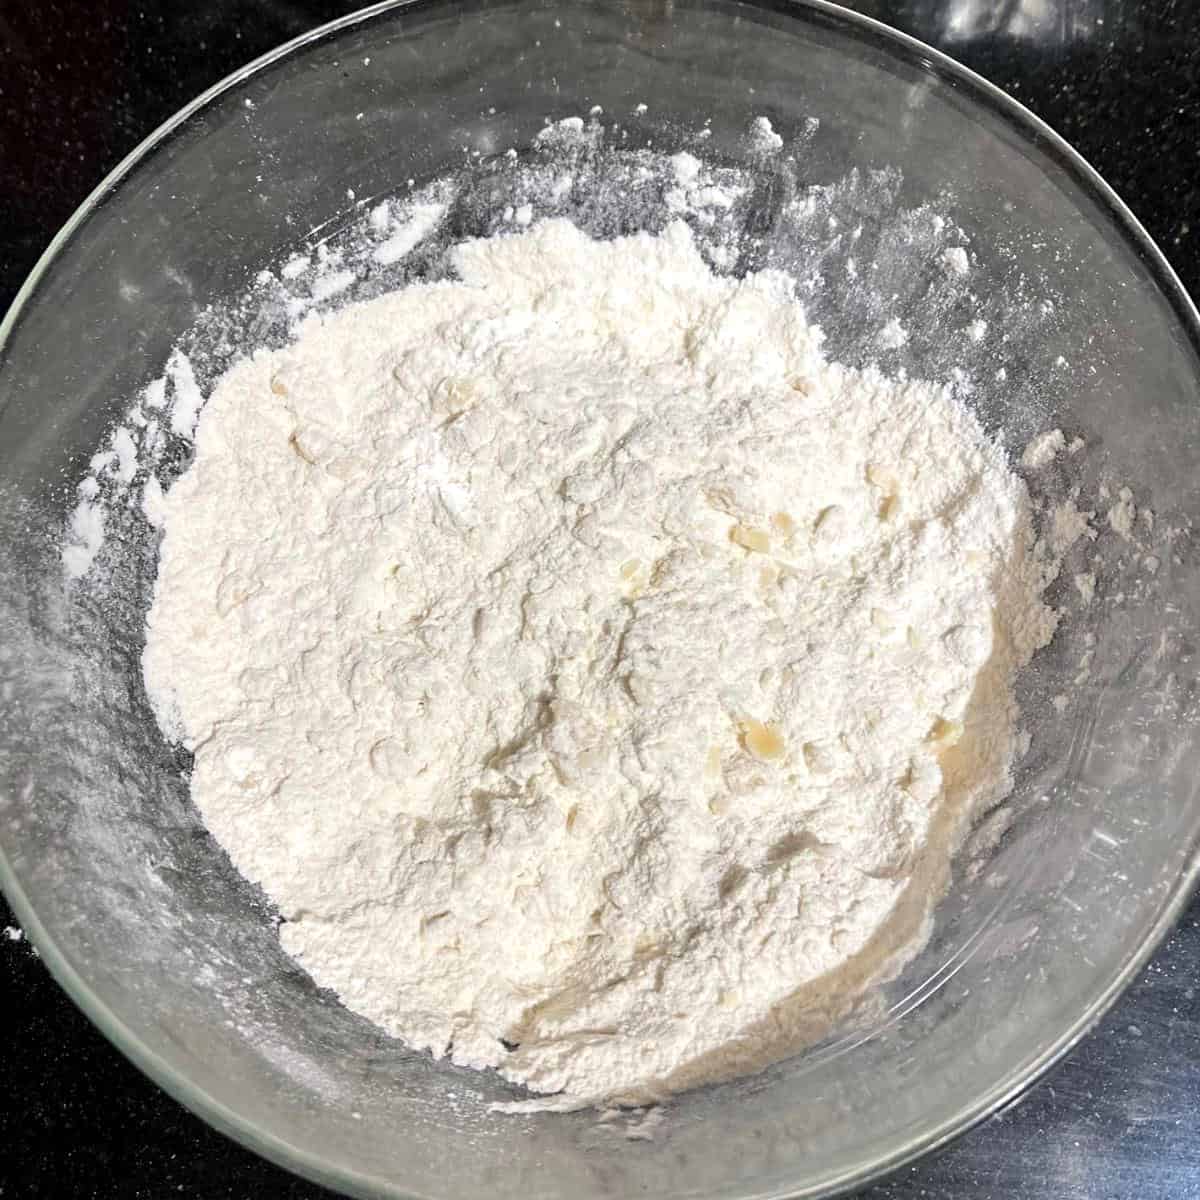 Oil mixed in flour in bowl.